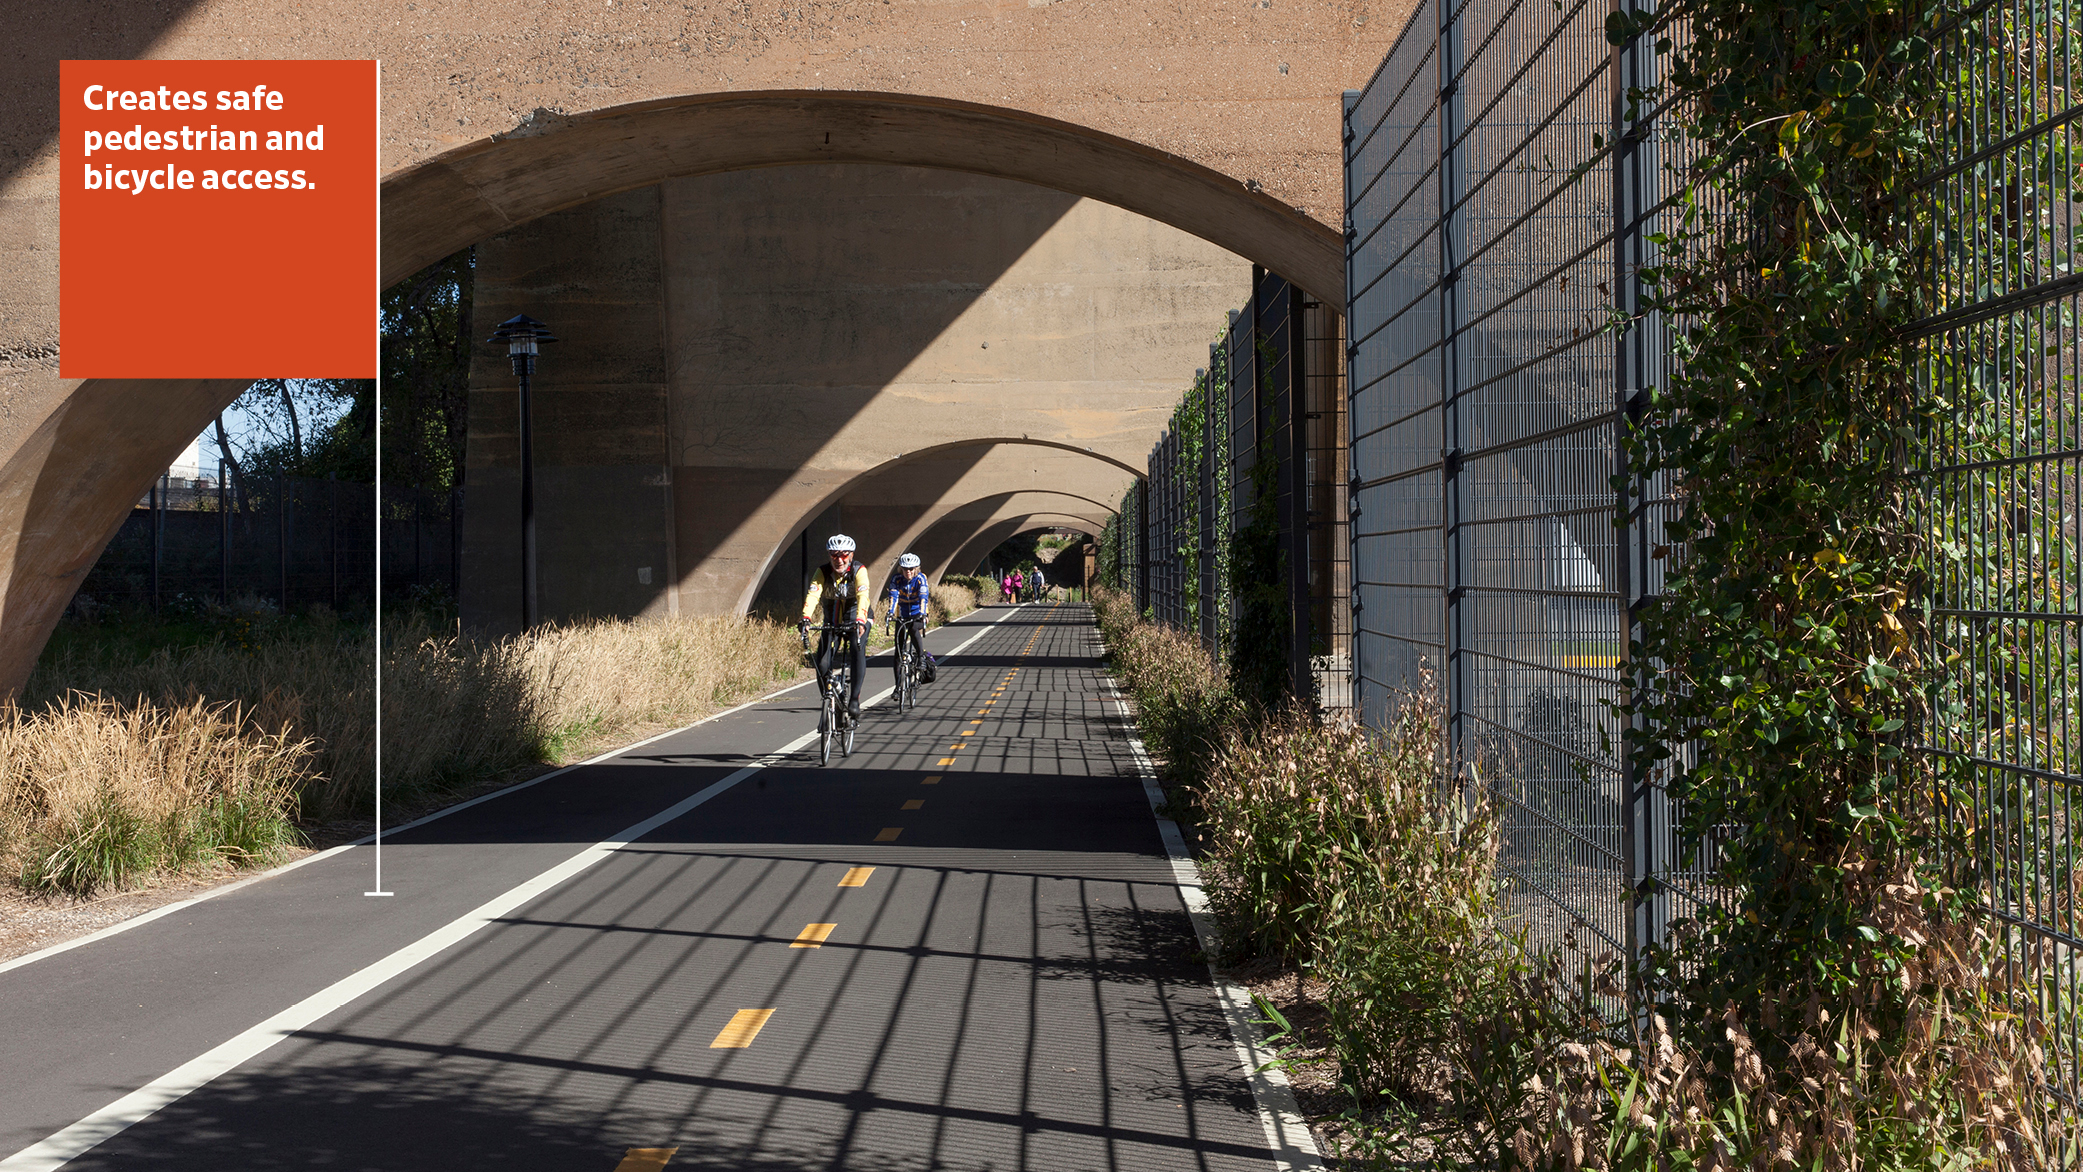 Two bicyclists enjoy riding on the pathway of the Randall’s Island Connector; at right, vines crawl up fence.